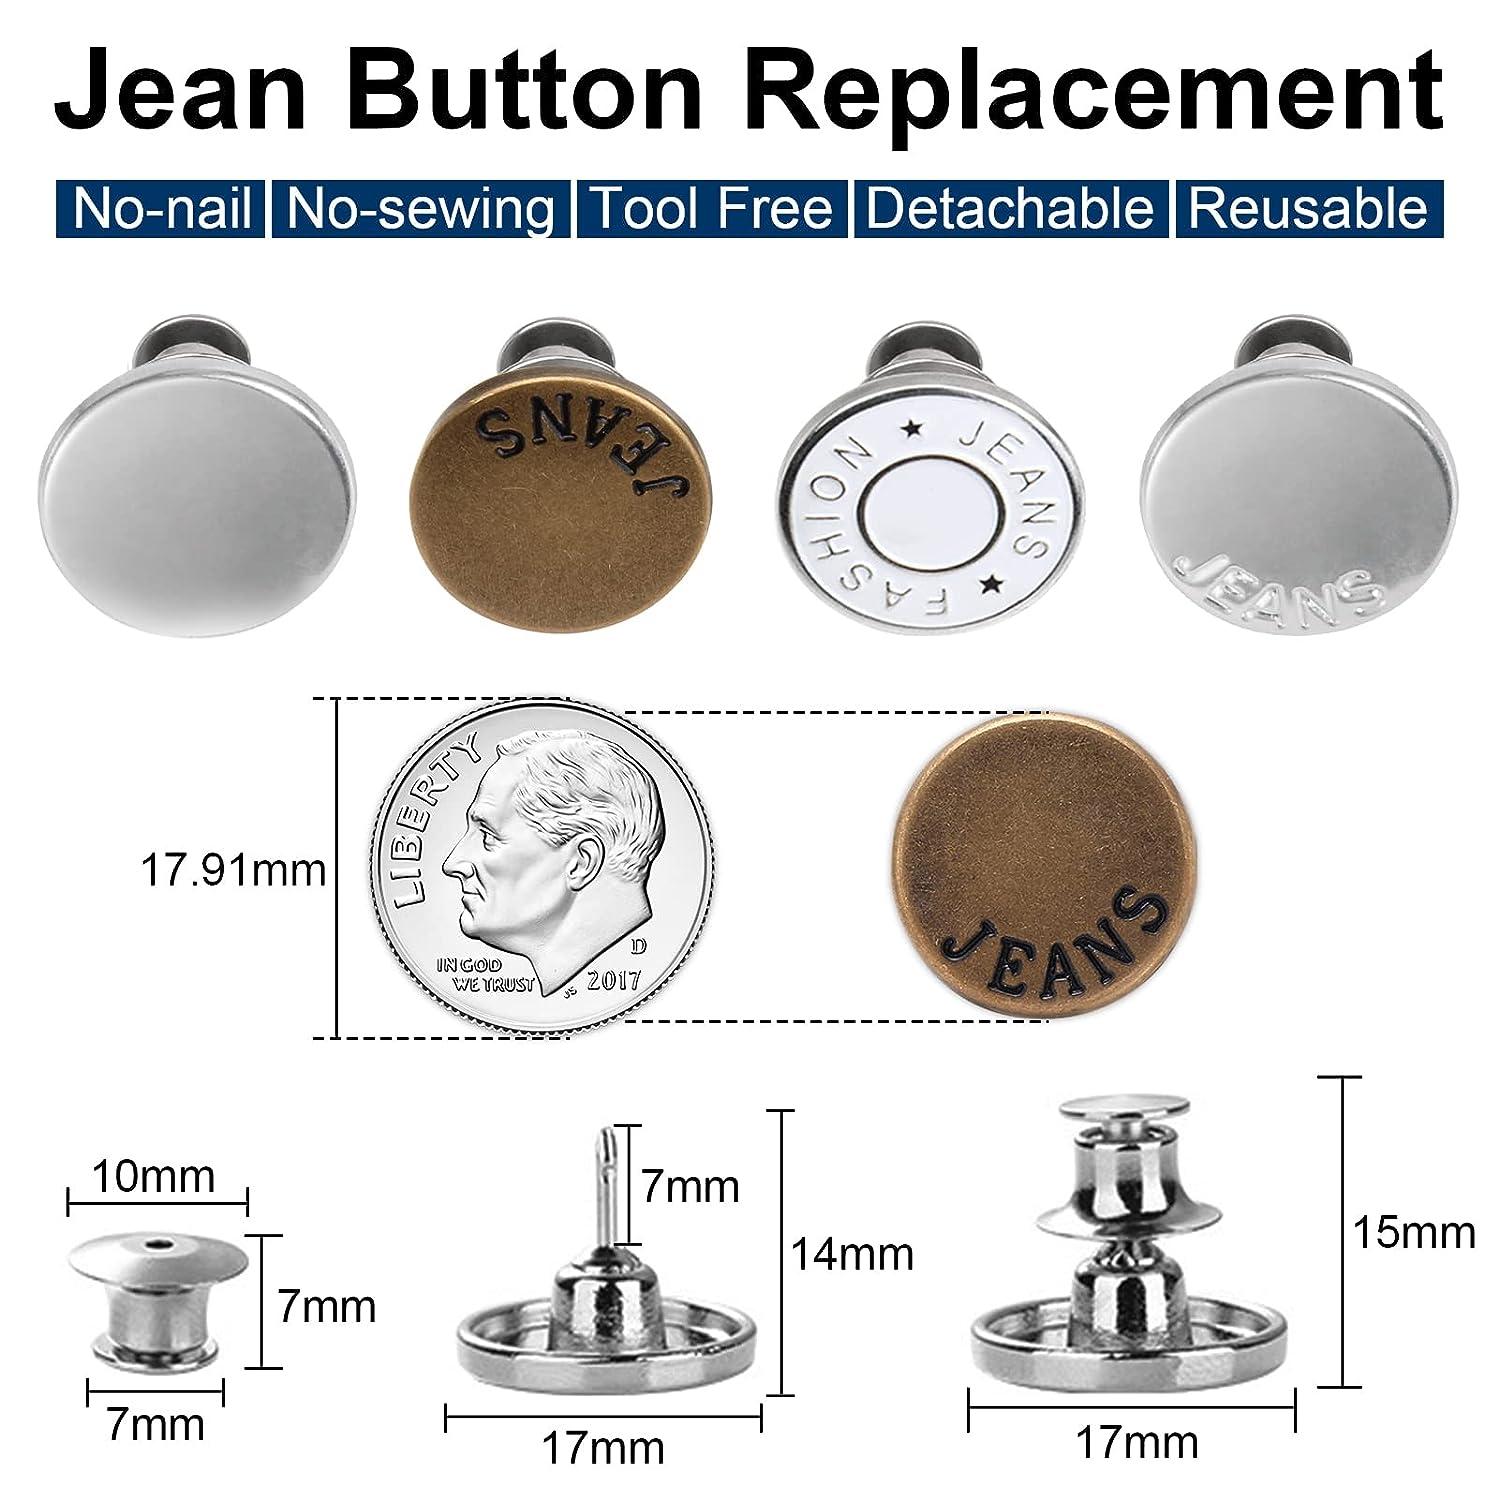 TOOVREN Upgraded 8 Sets Button Pins for Jeans Pants, No Sew Perfect Fit  Jean Button Tightener Replacement Adjustable Reusable Metal Clips Snap  Tack, Instant Reduce Too Big Pants Waist 8#A